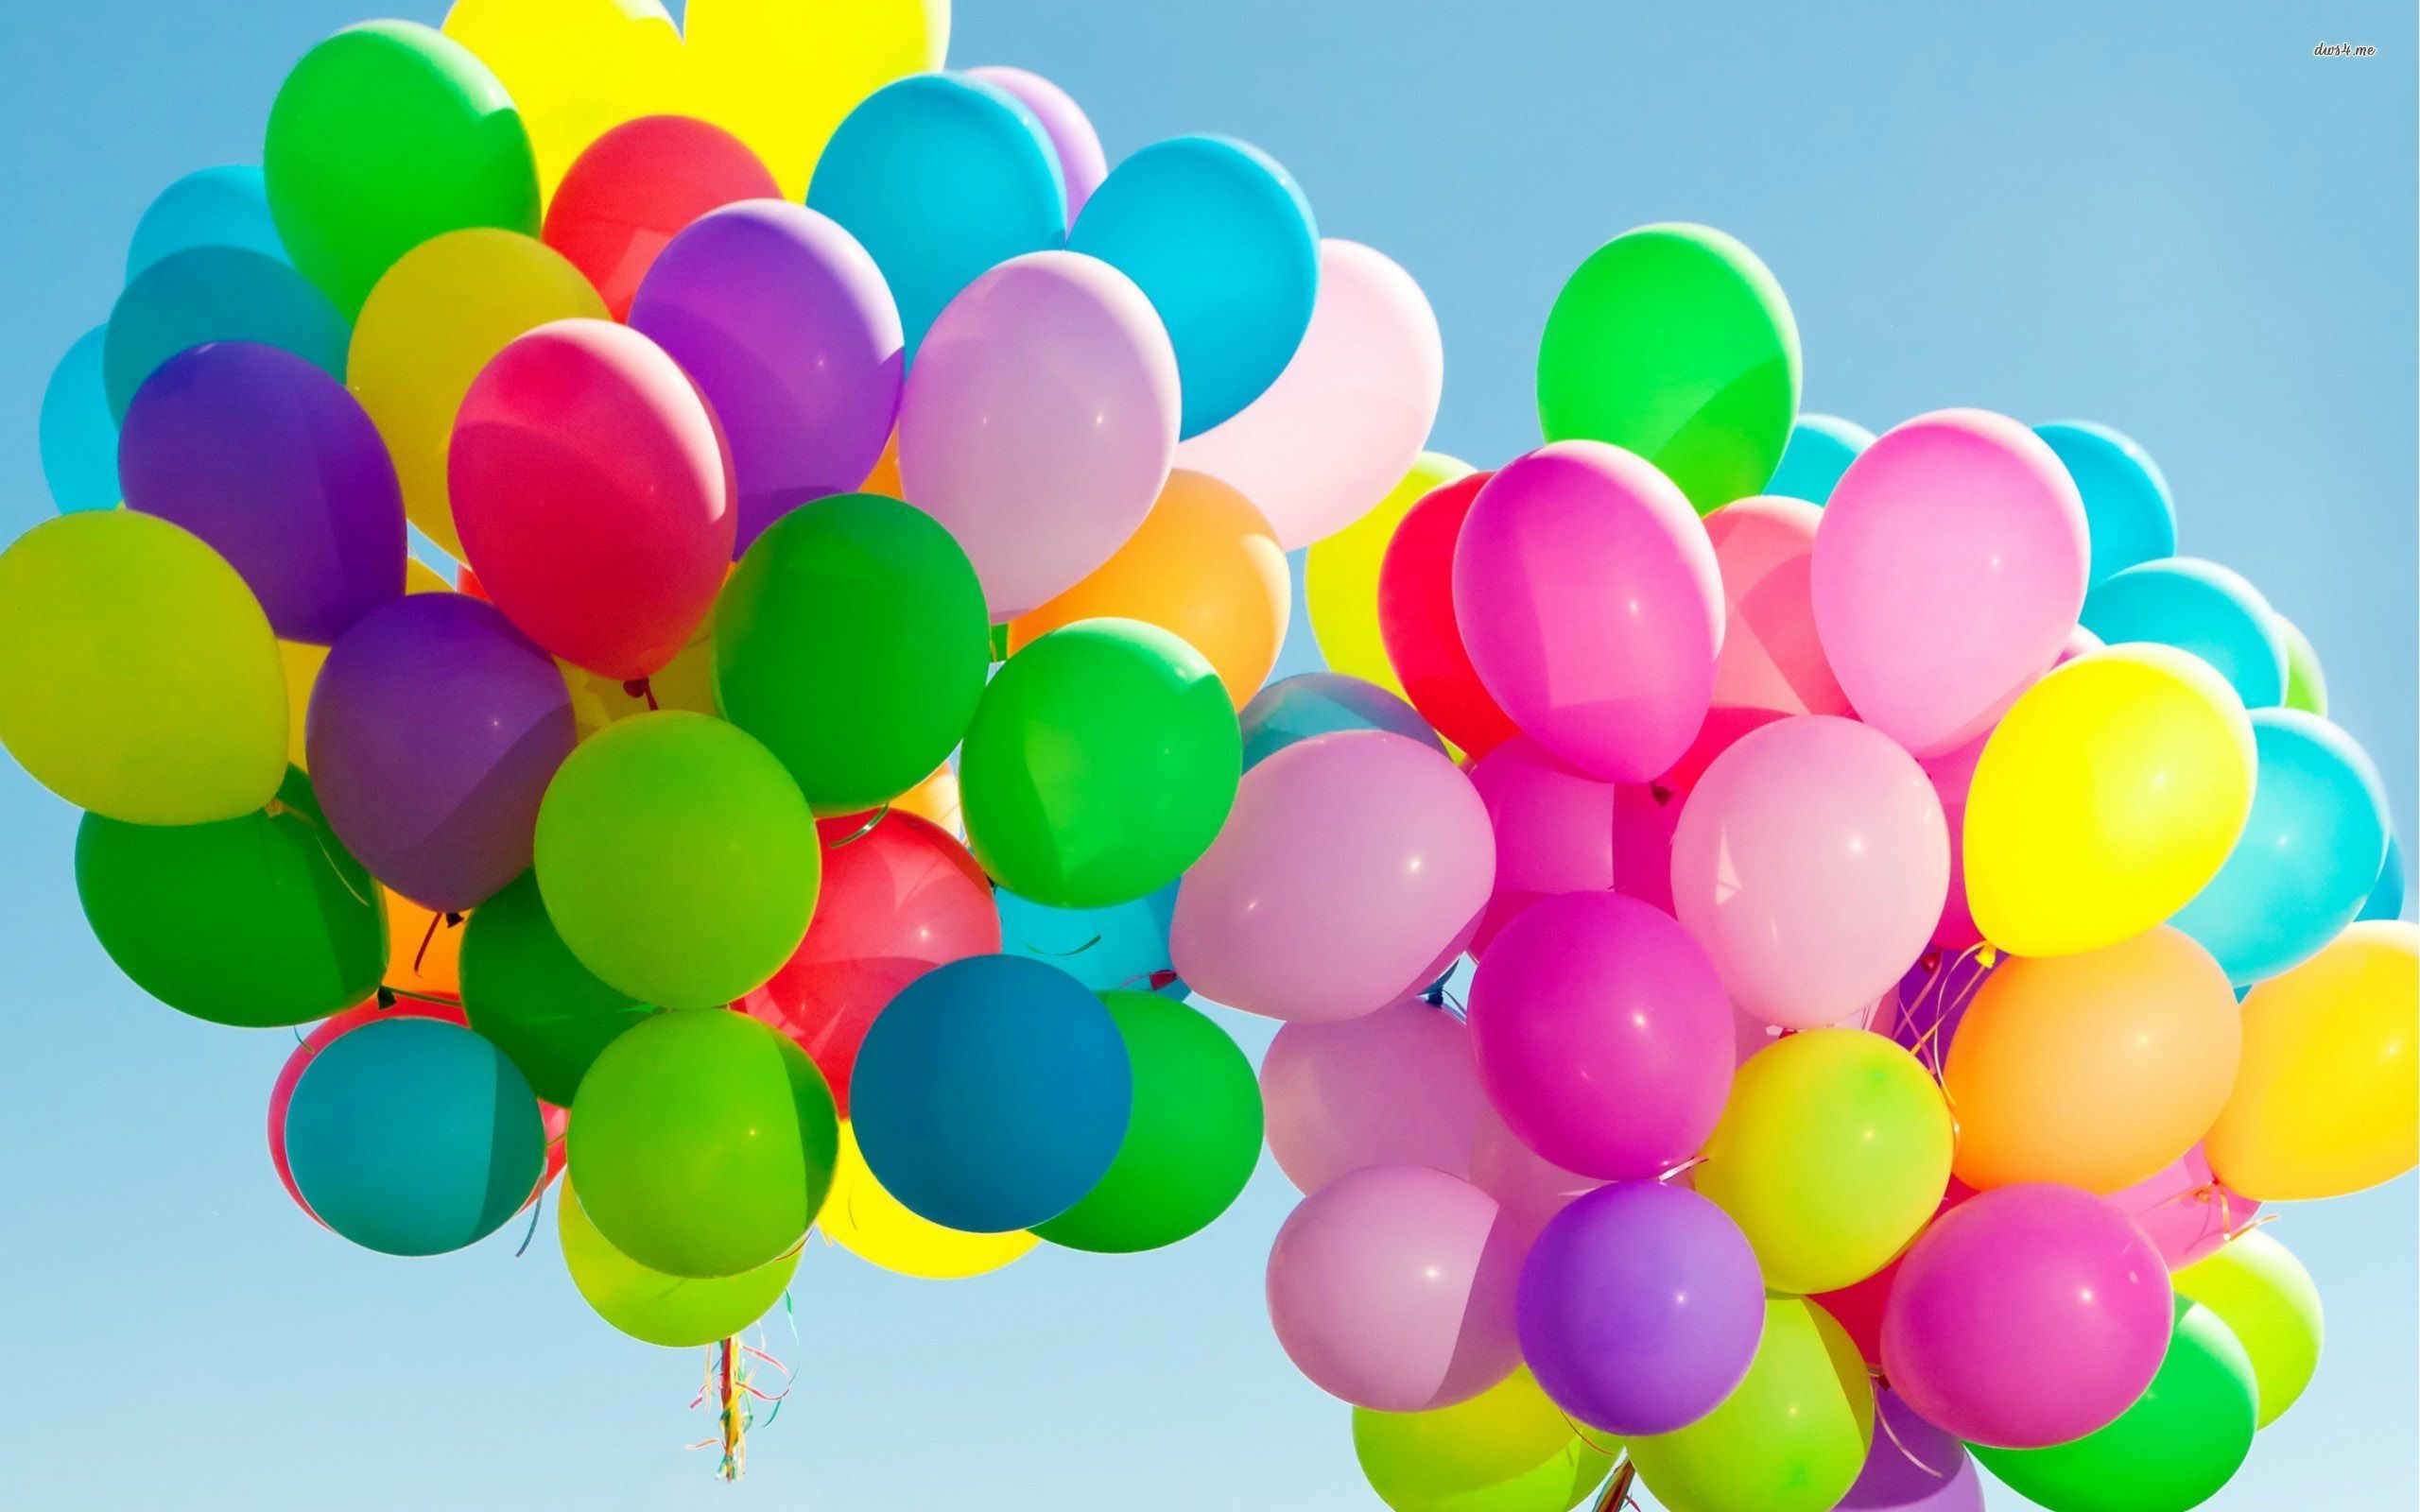 Colourful balloons wallpaper - Photography wallpapers - #30102